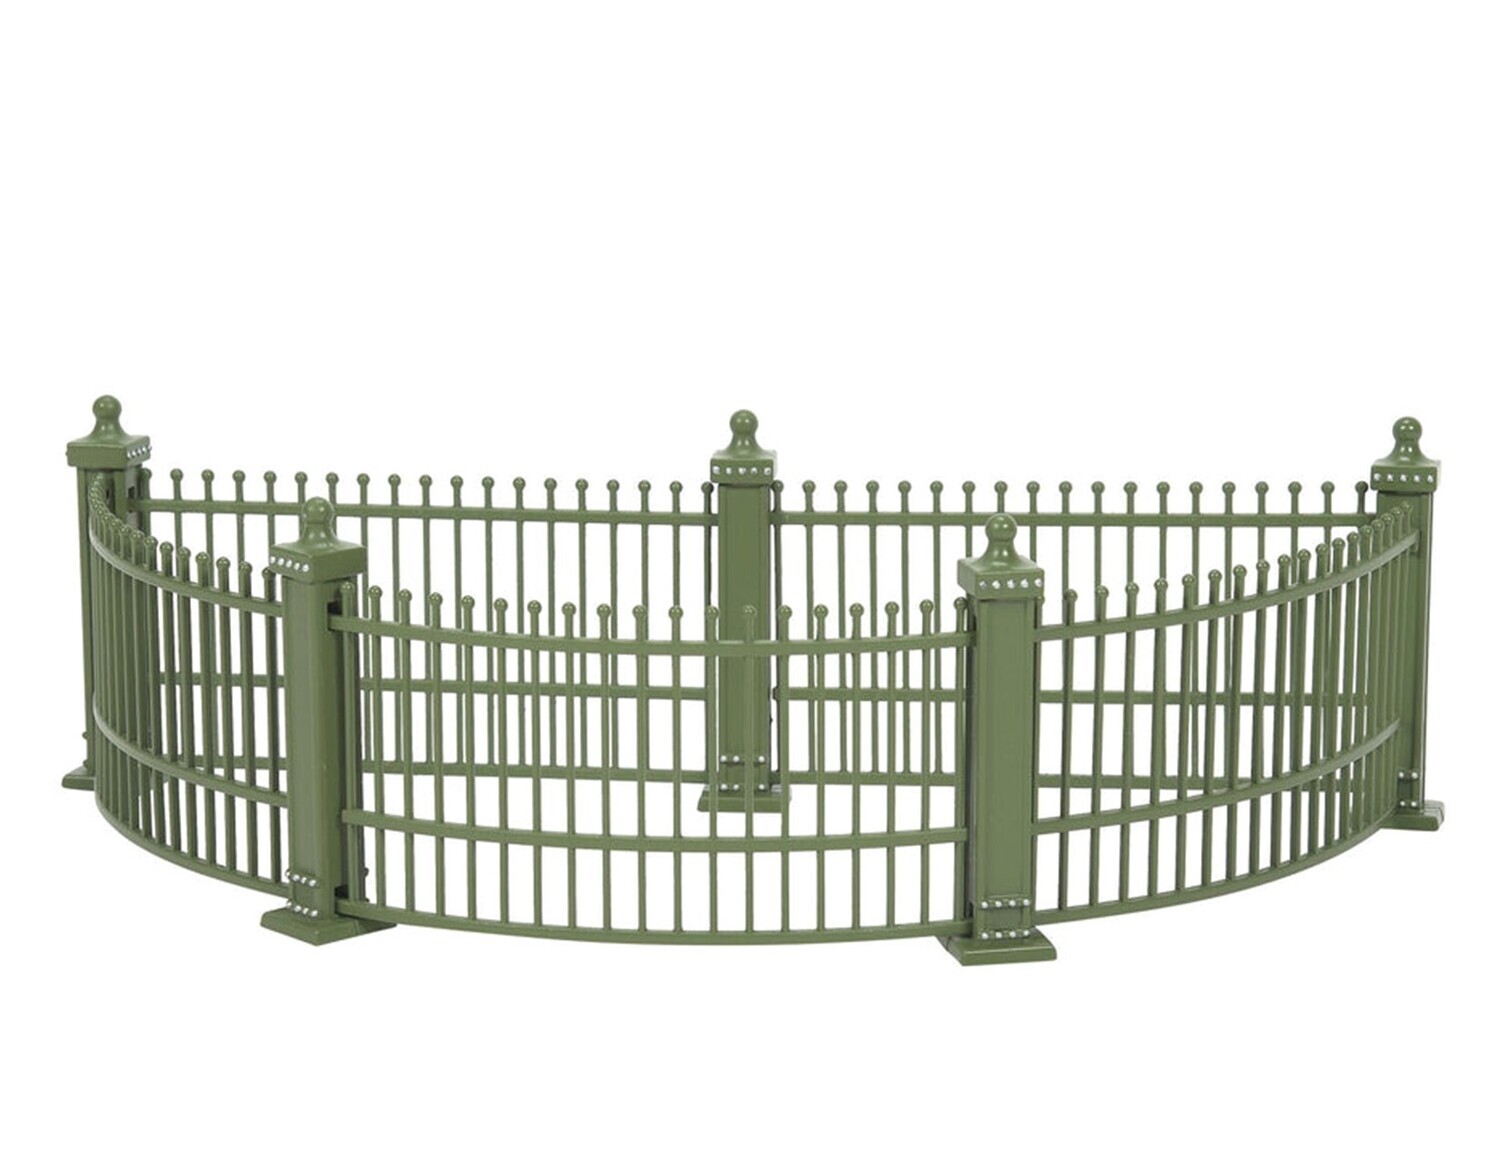 Department 56 Dickens Village "Zoological Garden's Fence" Accessory (6011452)